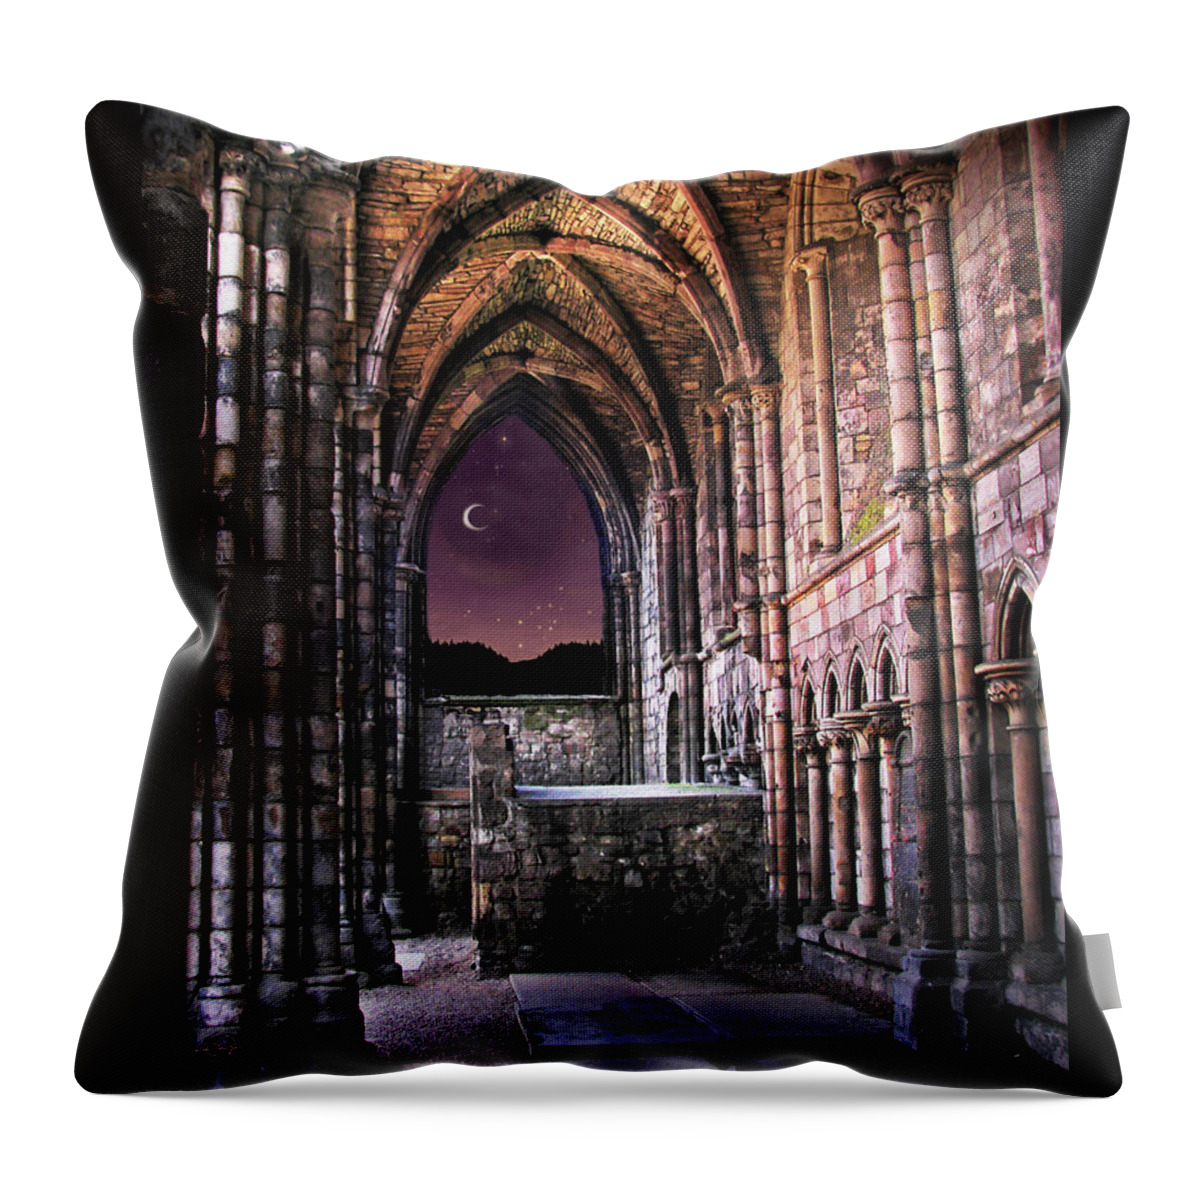 Abbey Throw Pillow featuring the digital art Ancient Alter by Vicki Lea Eggen